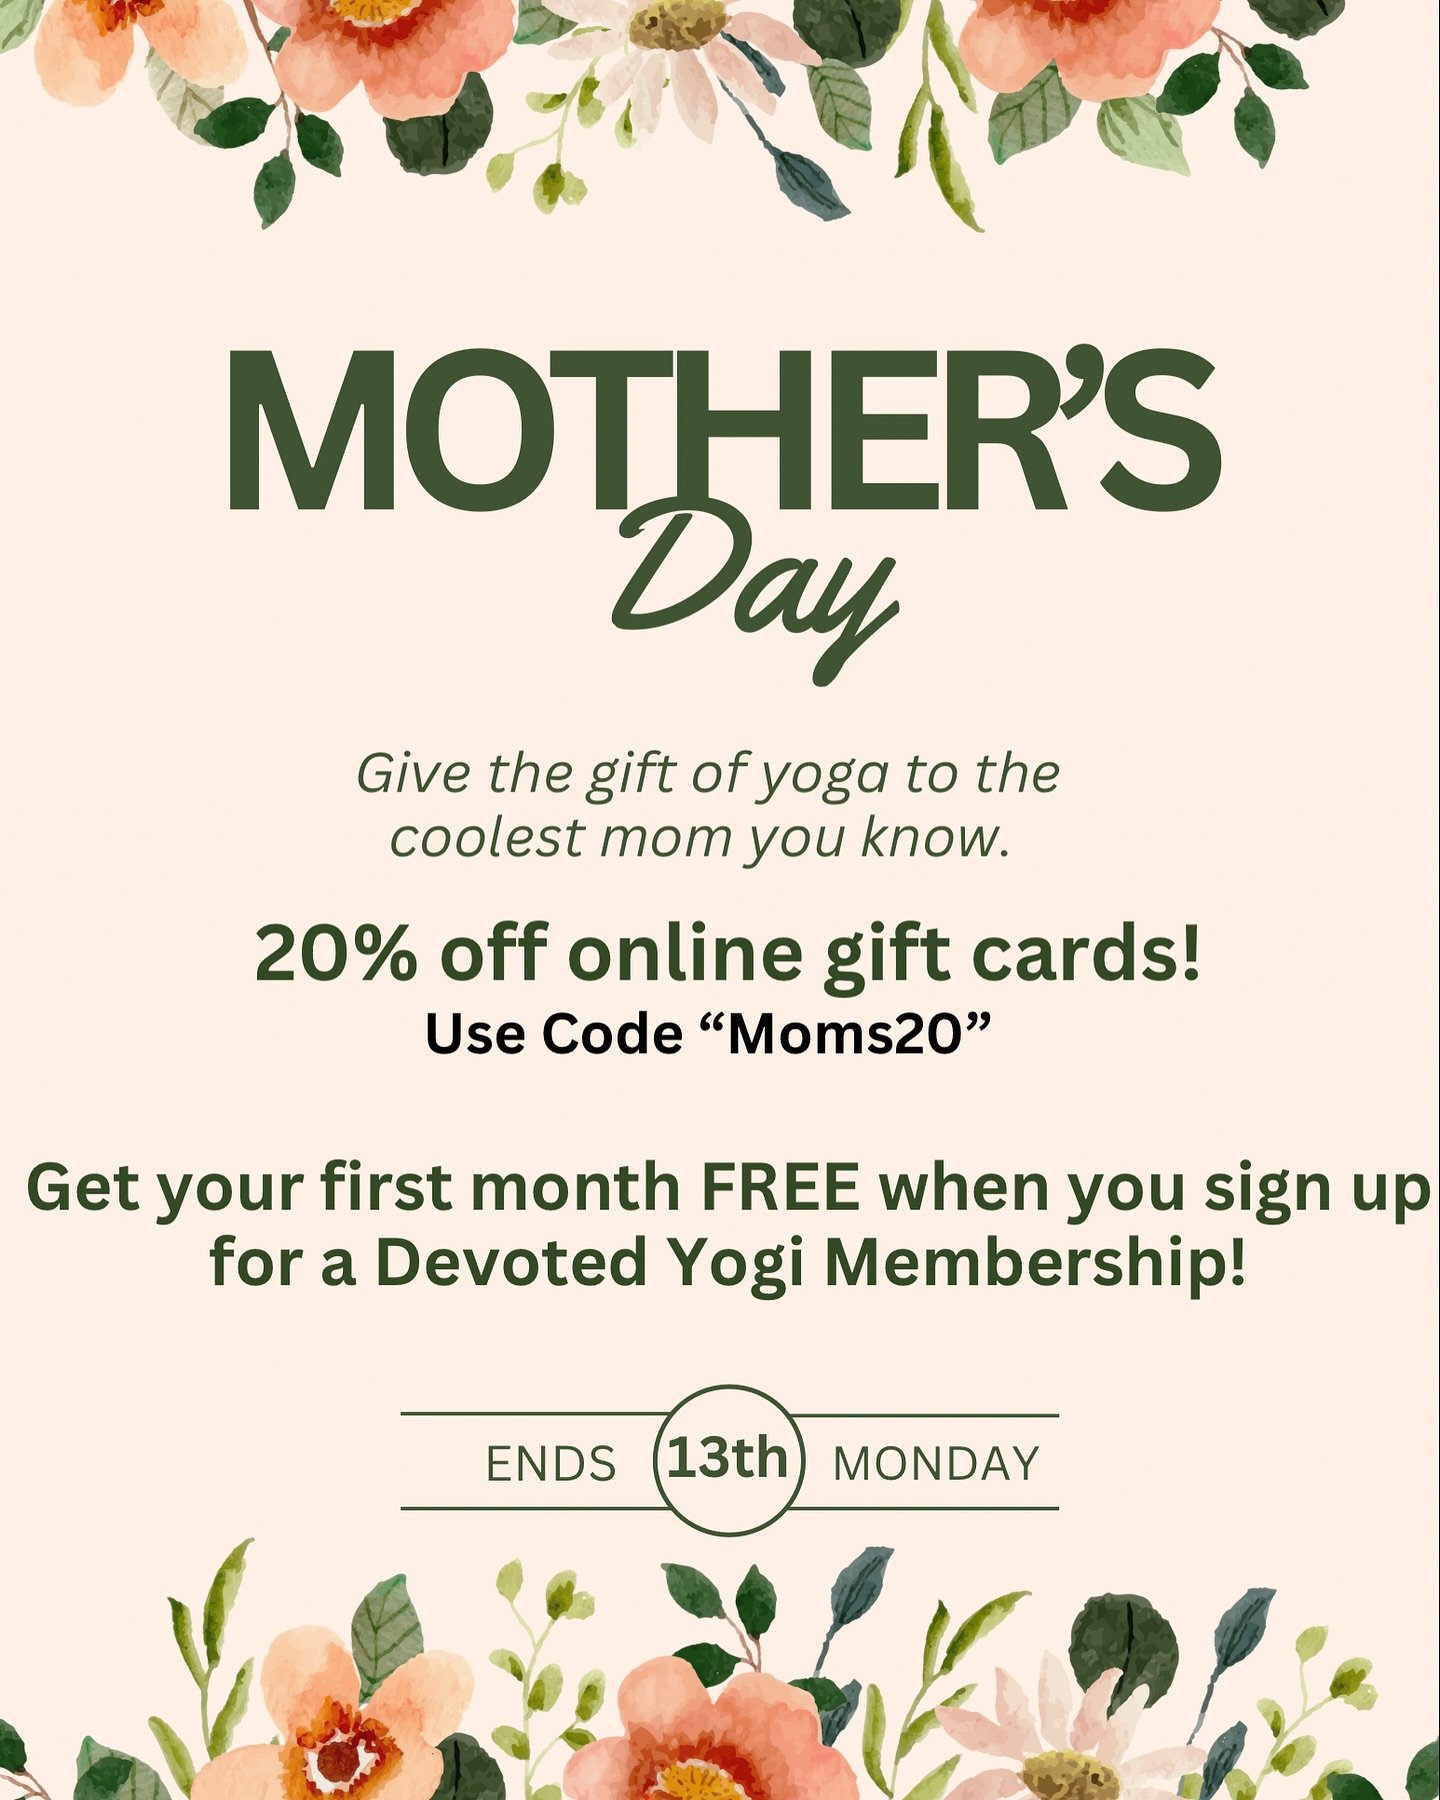 🌸Mother&rsquo;s Day Gift Card Sale🌸 

&bull; From now until Monday, May 13th, receive 20% off your gift card purchase online! 
&bull; Get your first month ✨FREE✨ when you sign up for a Devoted Yogi Membership at Kula! ($75 value!) 

Email yoga@kula